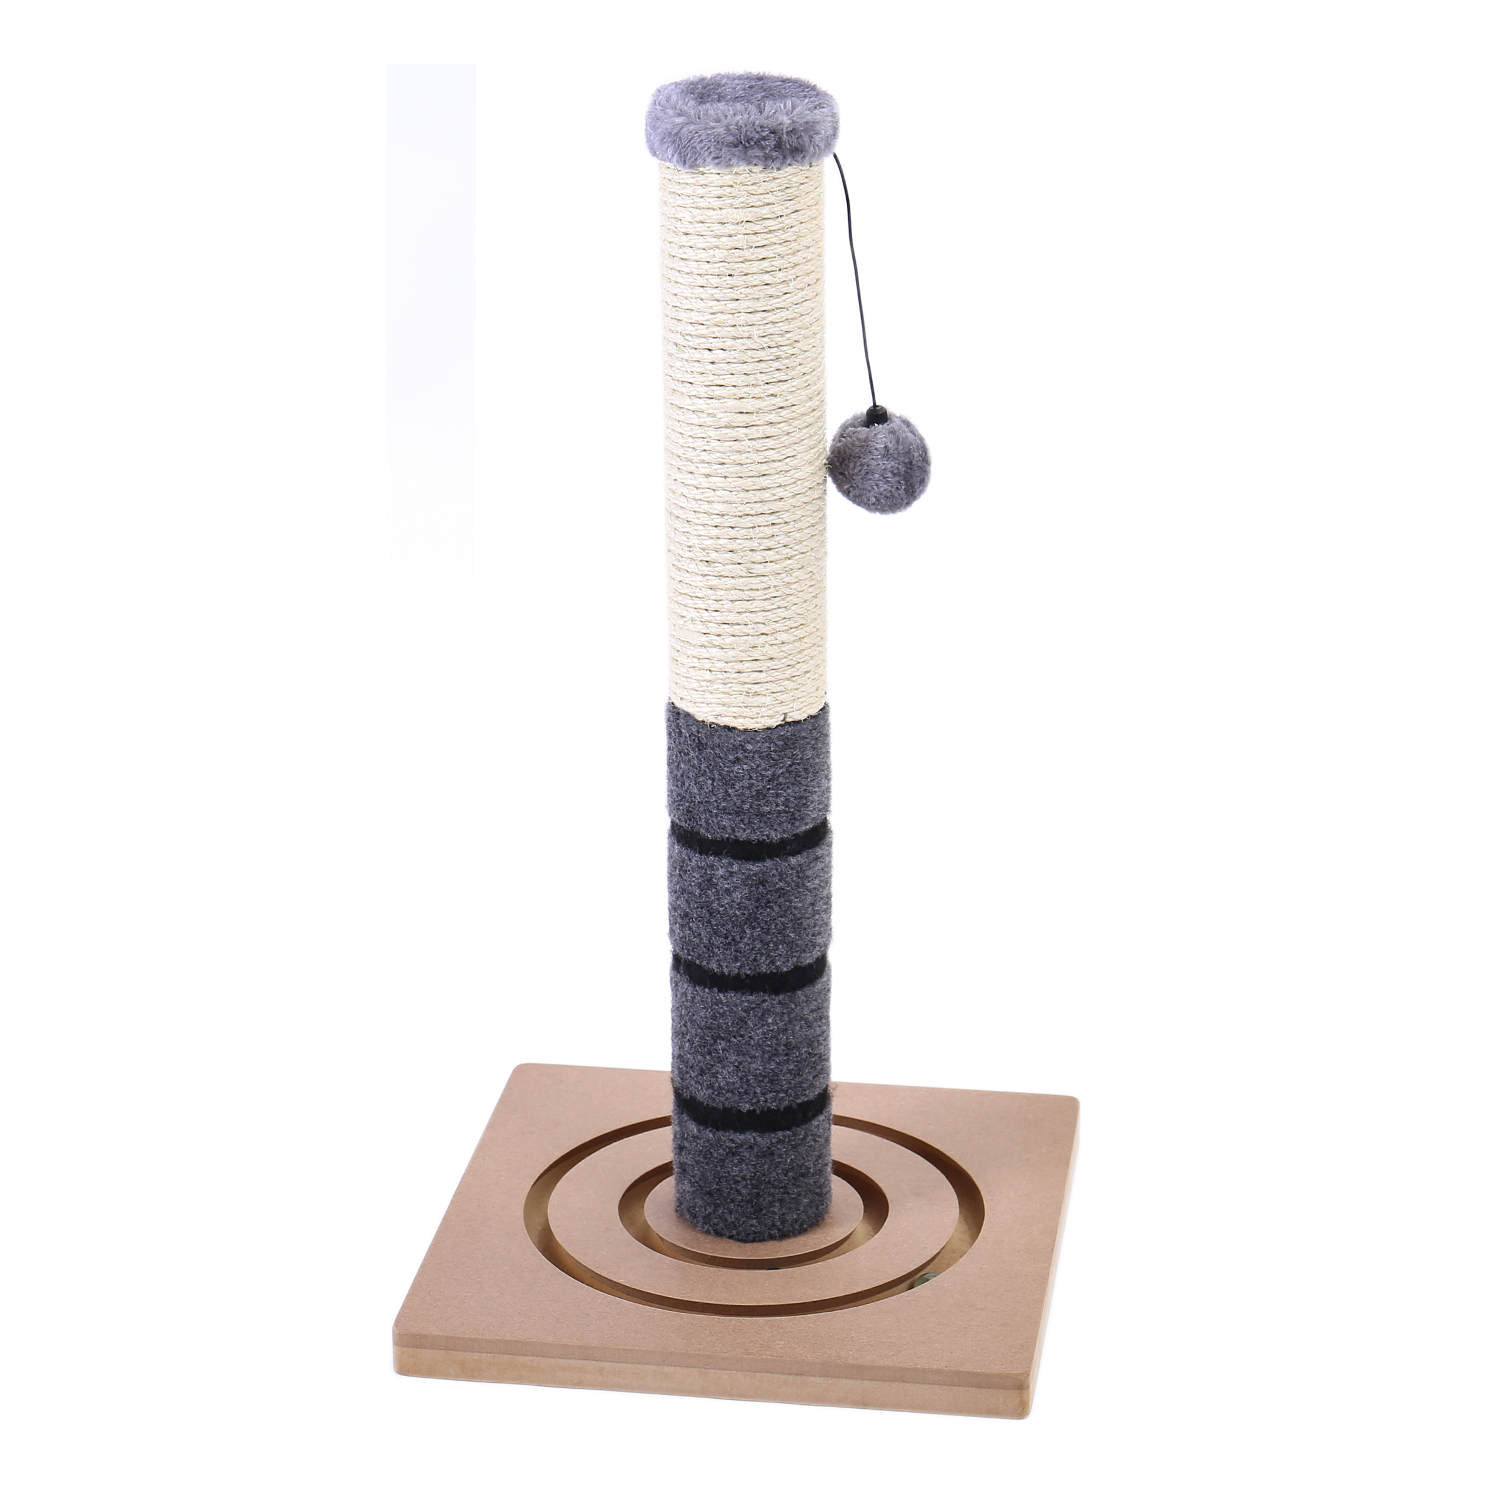 Tianyuan Ecofriendly Interactive Cat Toy Single Scratcher Post Cat Tree With Ball